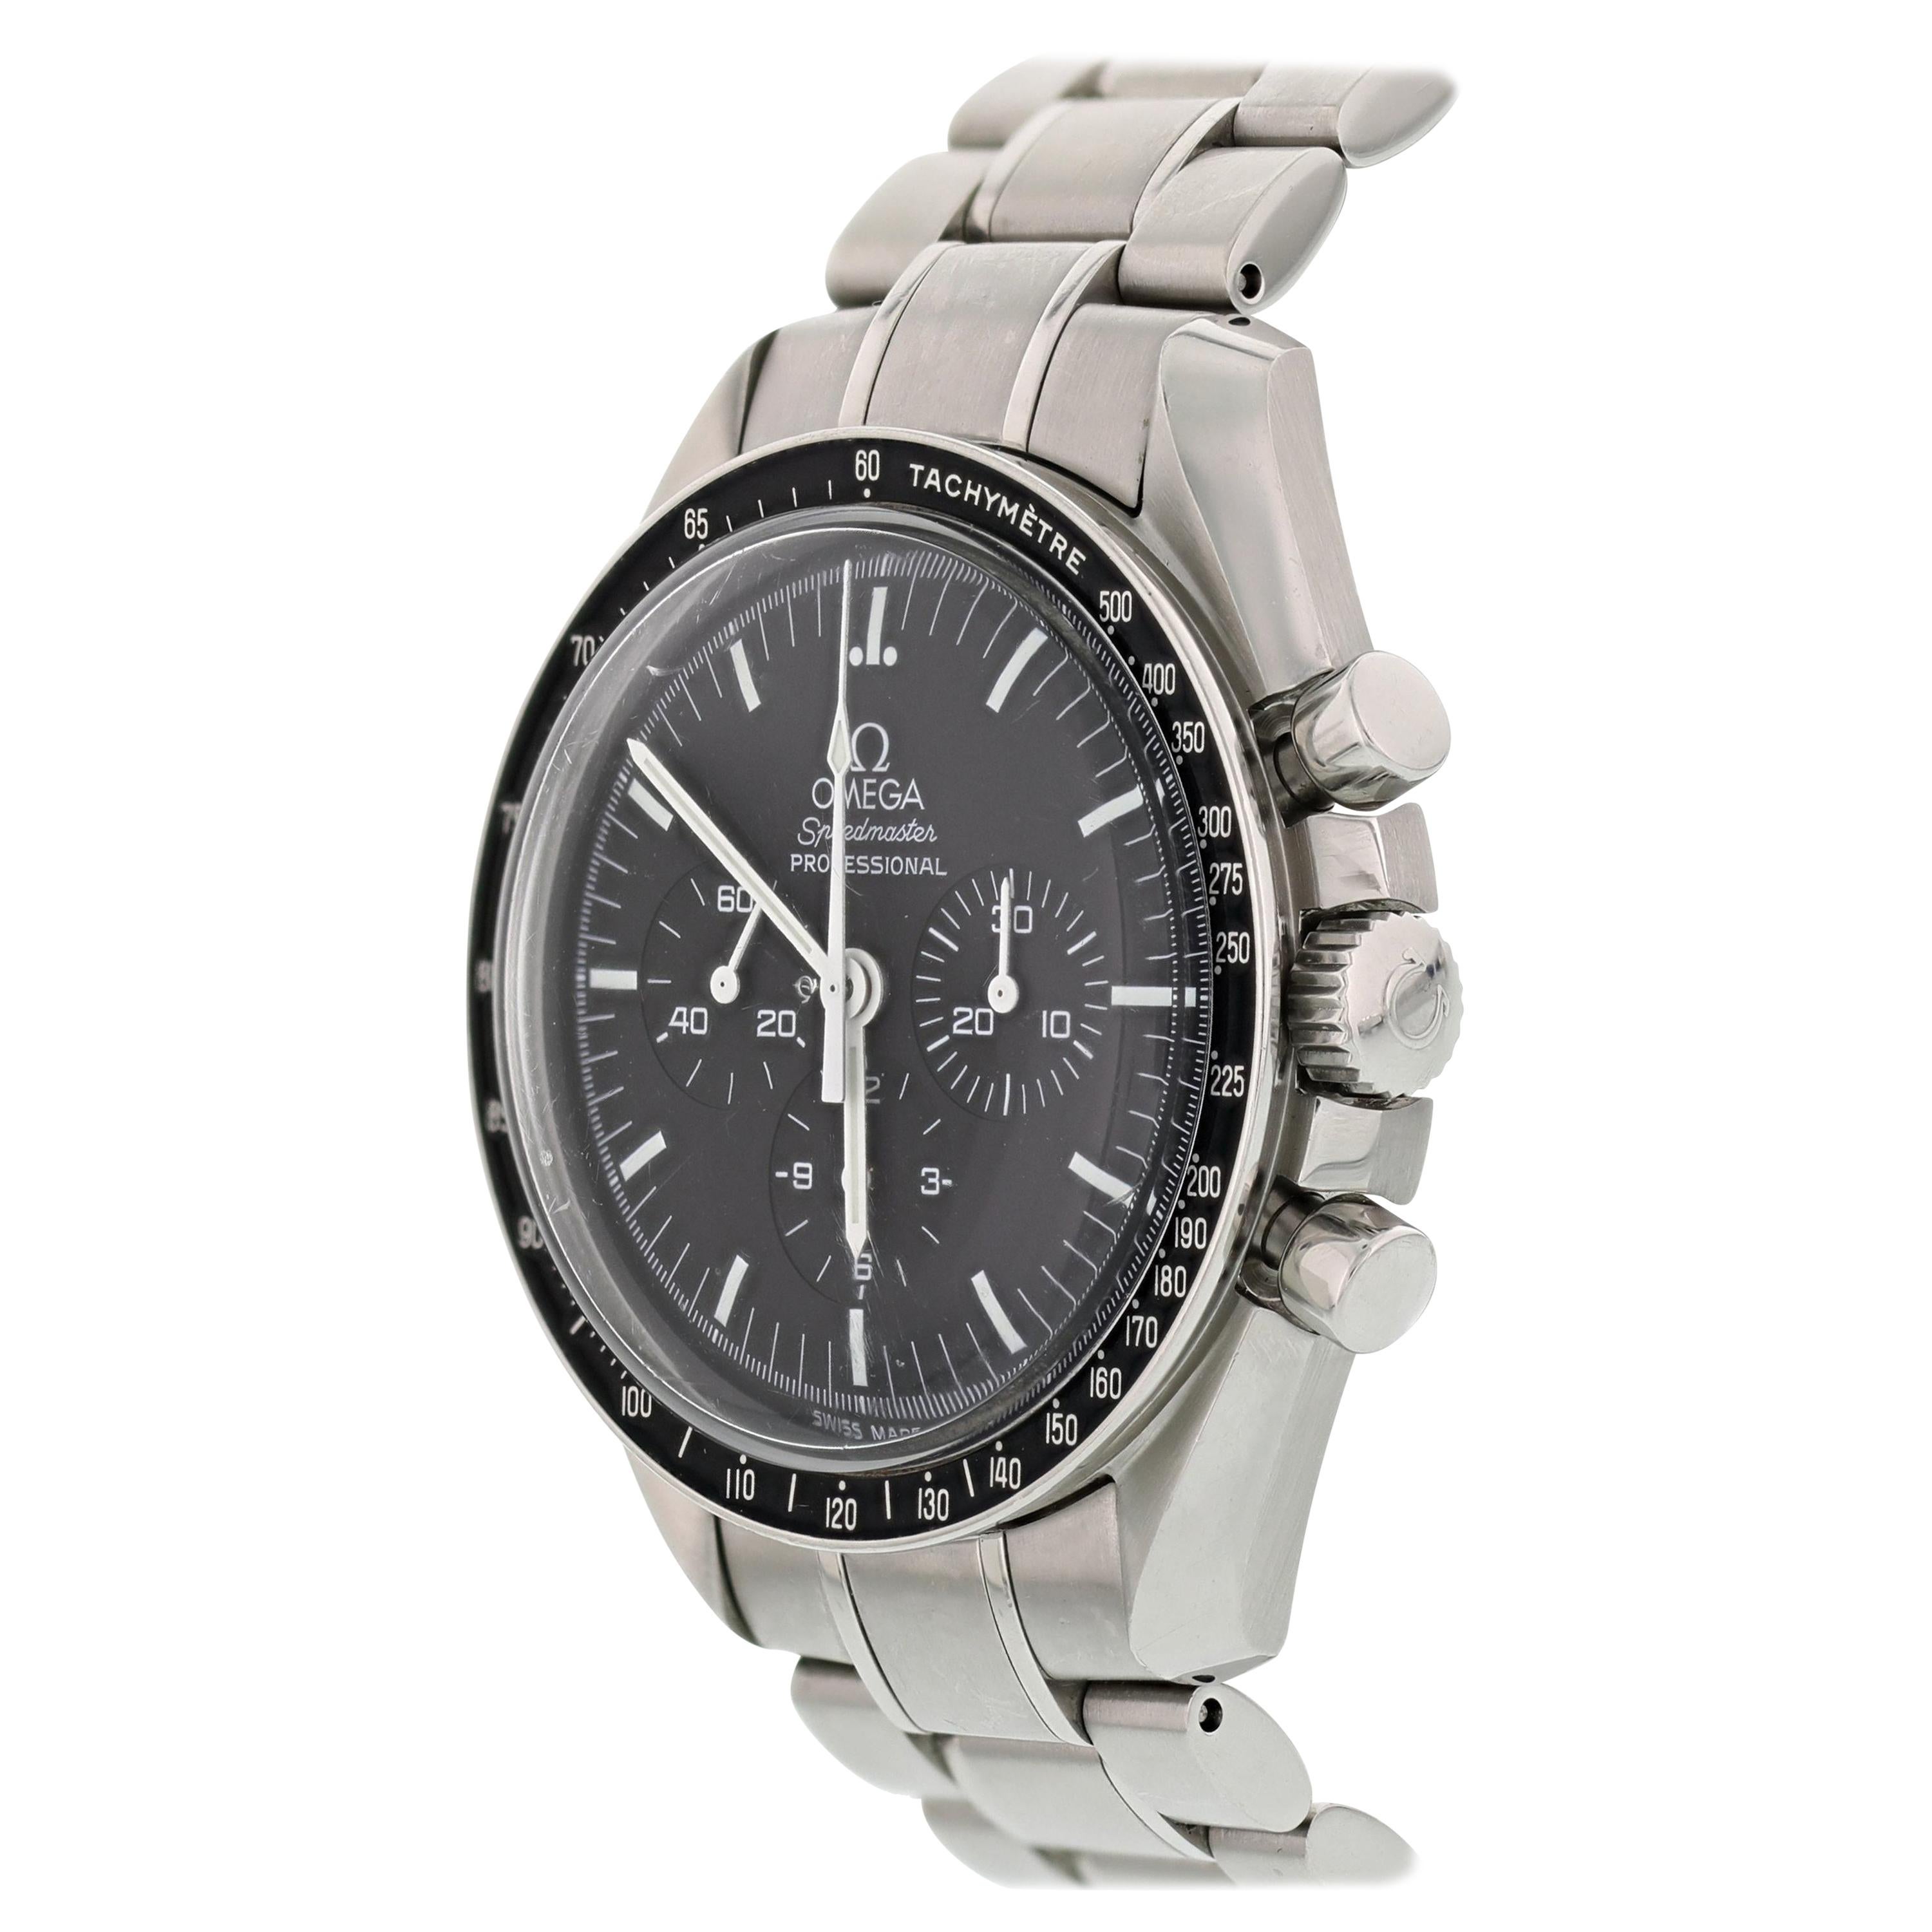 Omega Speedmaster Professional Moonwatch 3570.50 Box Papers